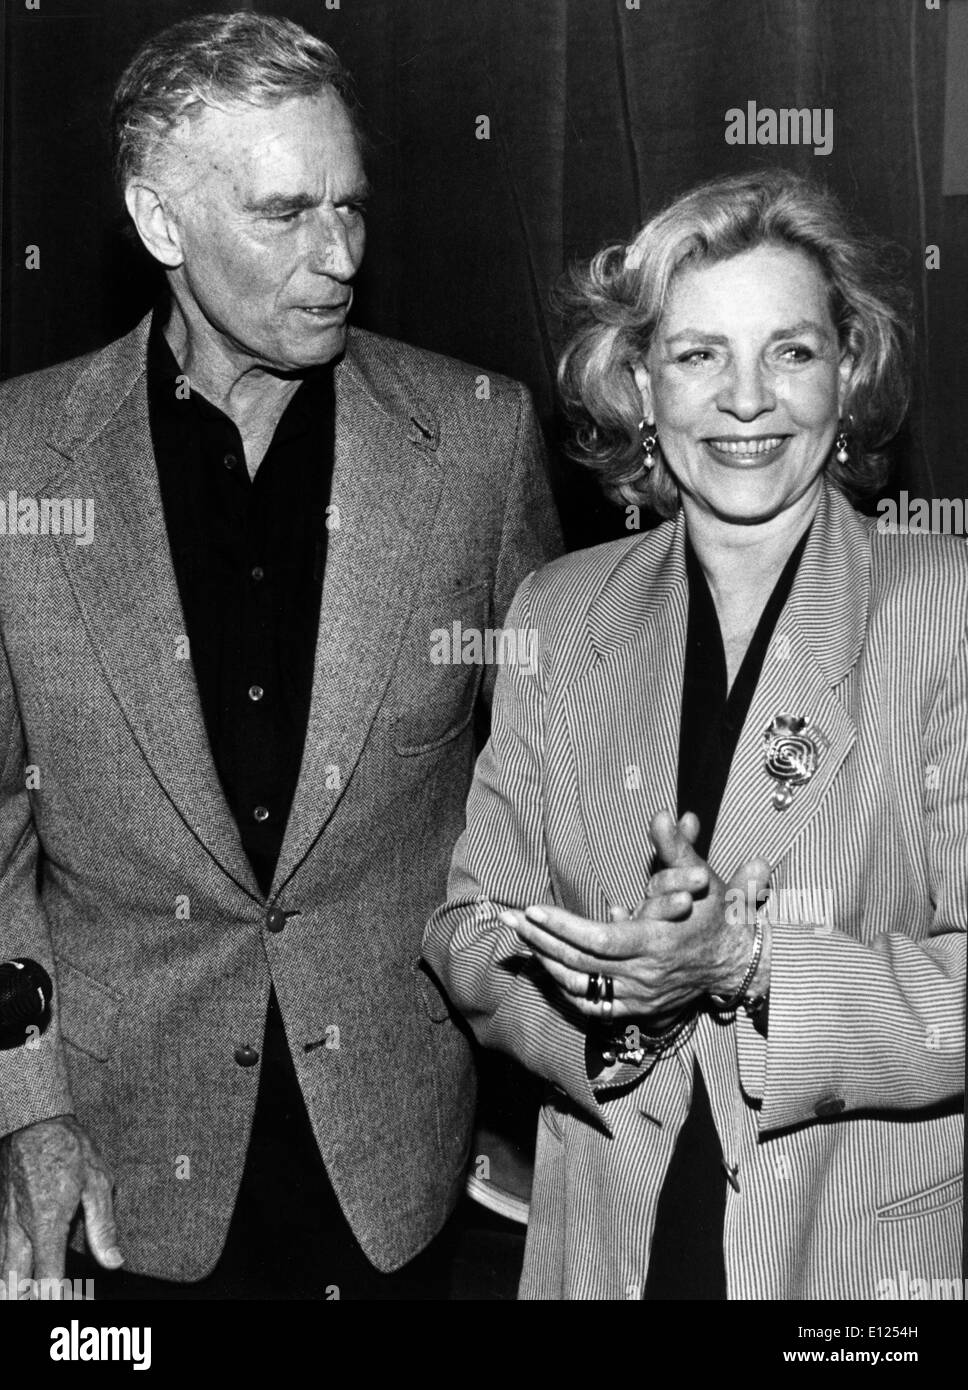 Jun 21, 1991; Rome, Italy; Actor CHARLTON HESTON known for his religious roles in 'Ben-Hur' and 'The Ten Commandments', pictured with LAUREN BACALL. . (Credit Image: KEYSTONE Pictures USA/ZUMAPRESS.com) Stock Photo